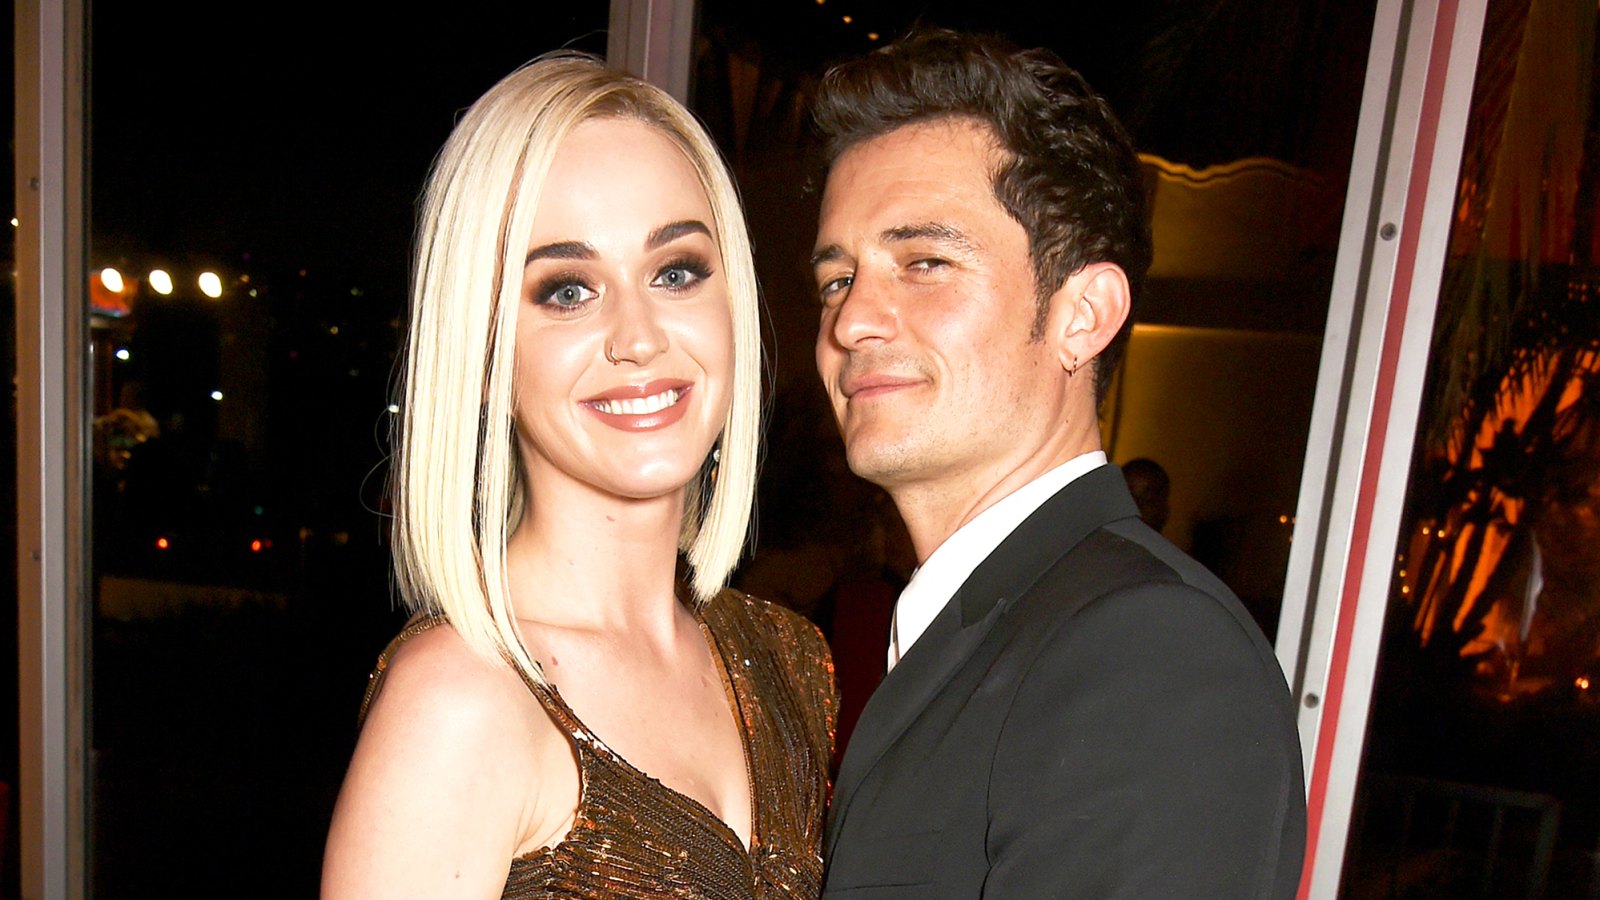 Katy Perry and Orlando Bloom attend the 2017 Vanity Fair Oscar Party in 2017.